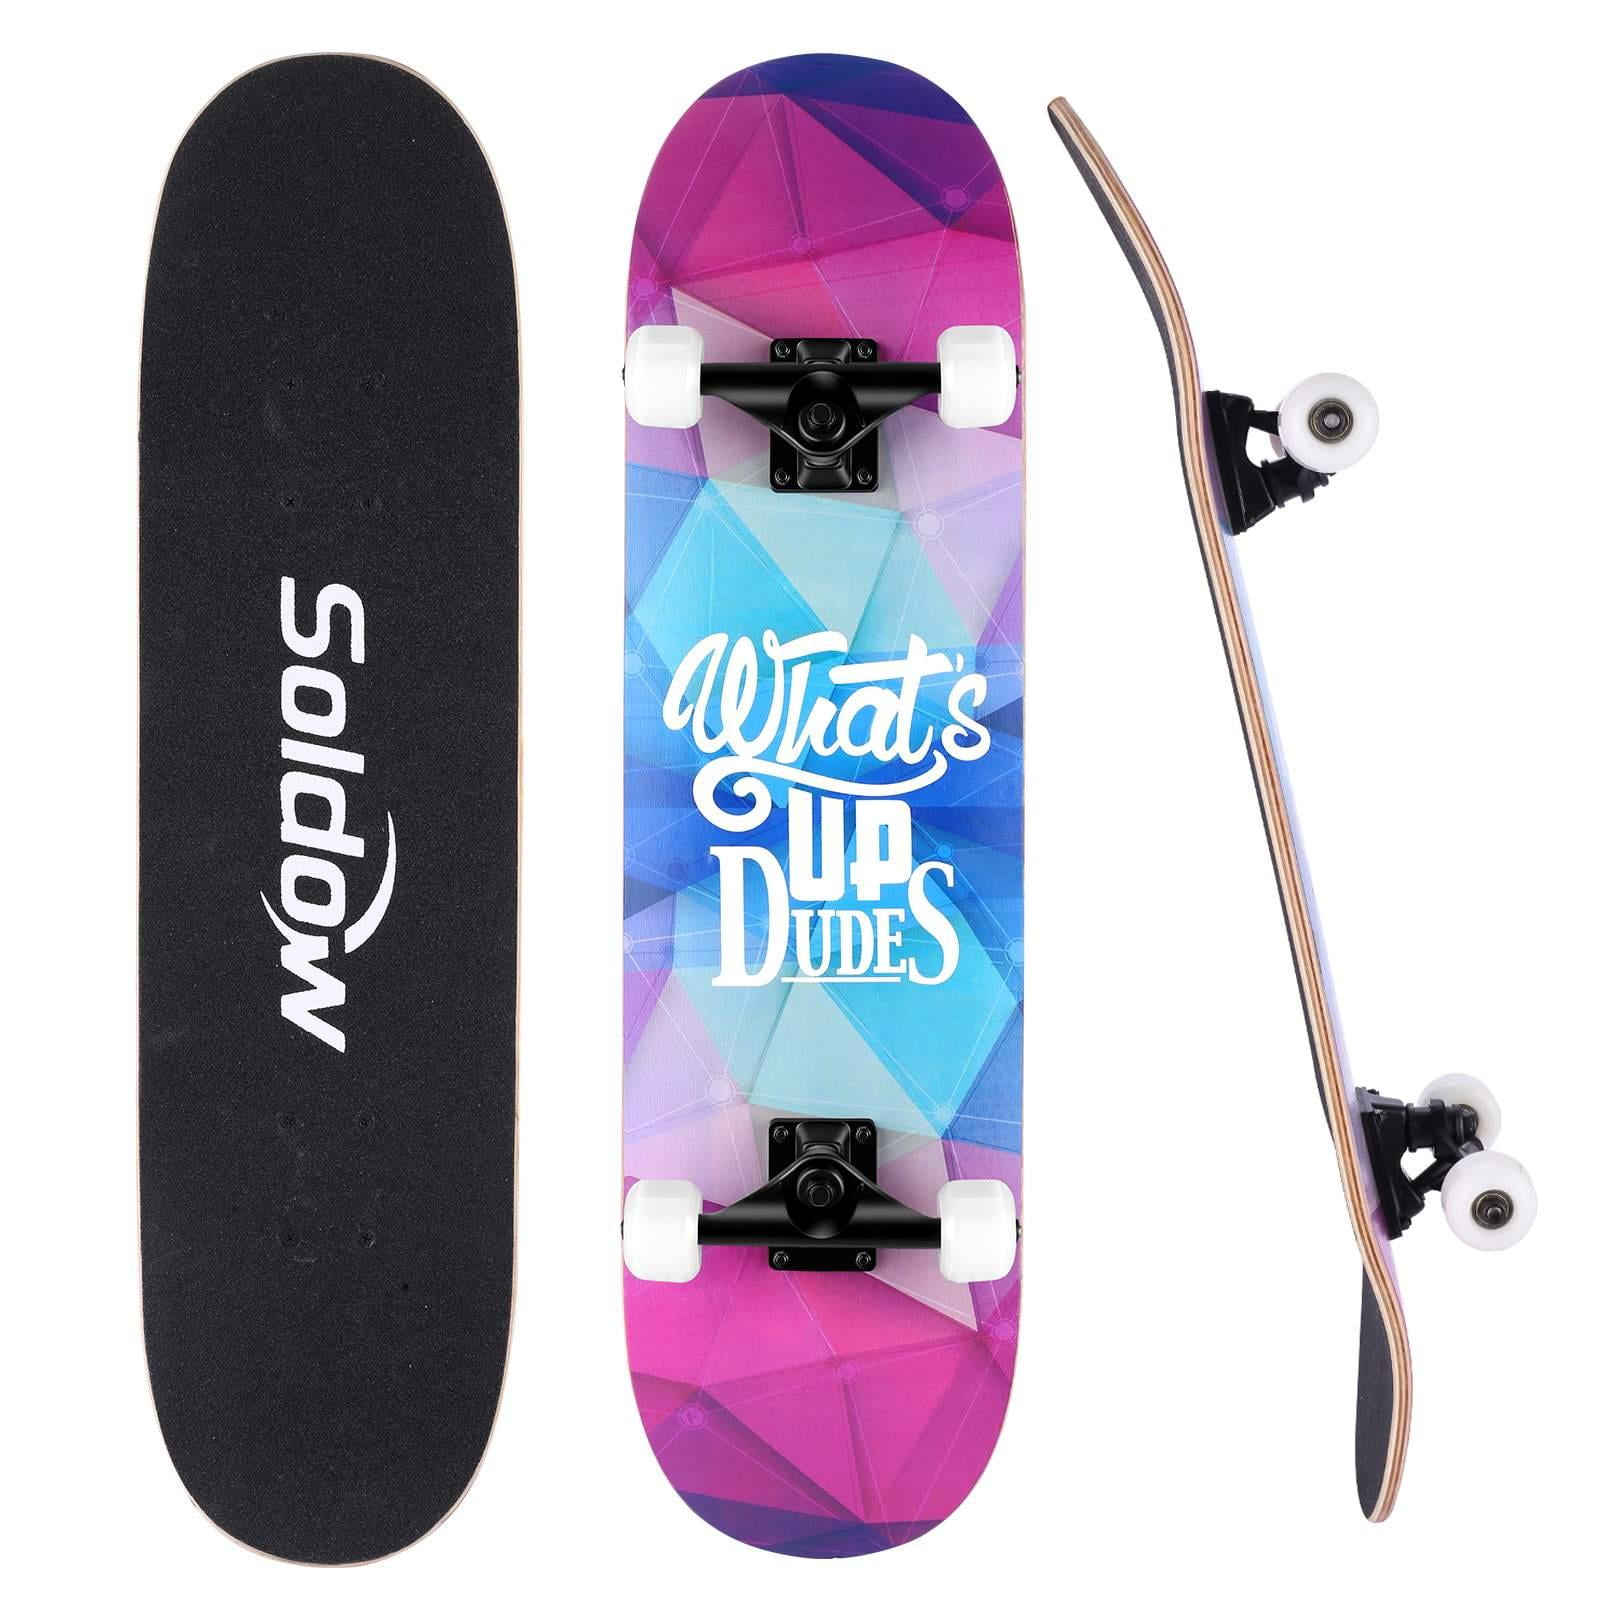 Aceshion Skateboards Adult 31X8 Inch Maple Wood Teenagers Double Tricks Pro Complete Skate Board for Beginner Girls Boys blue